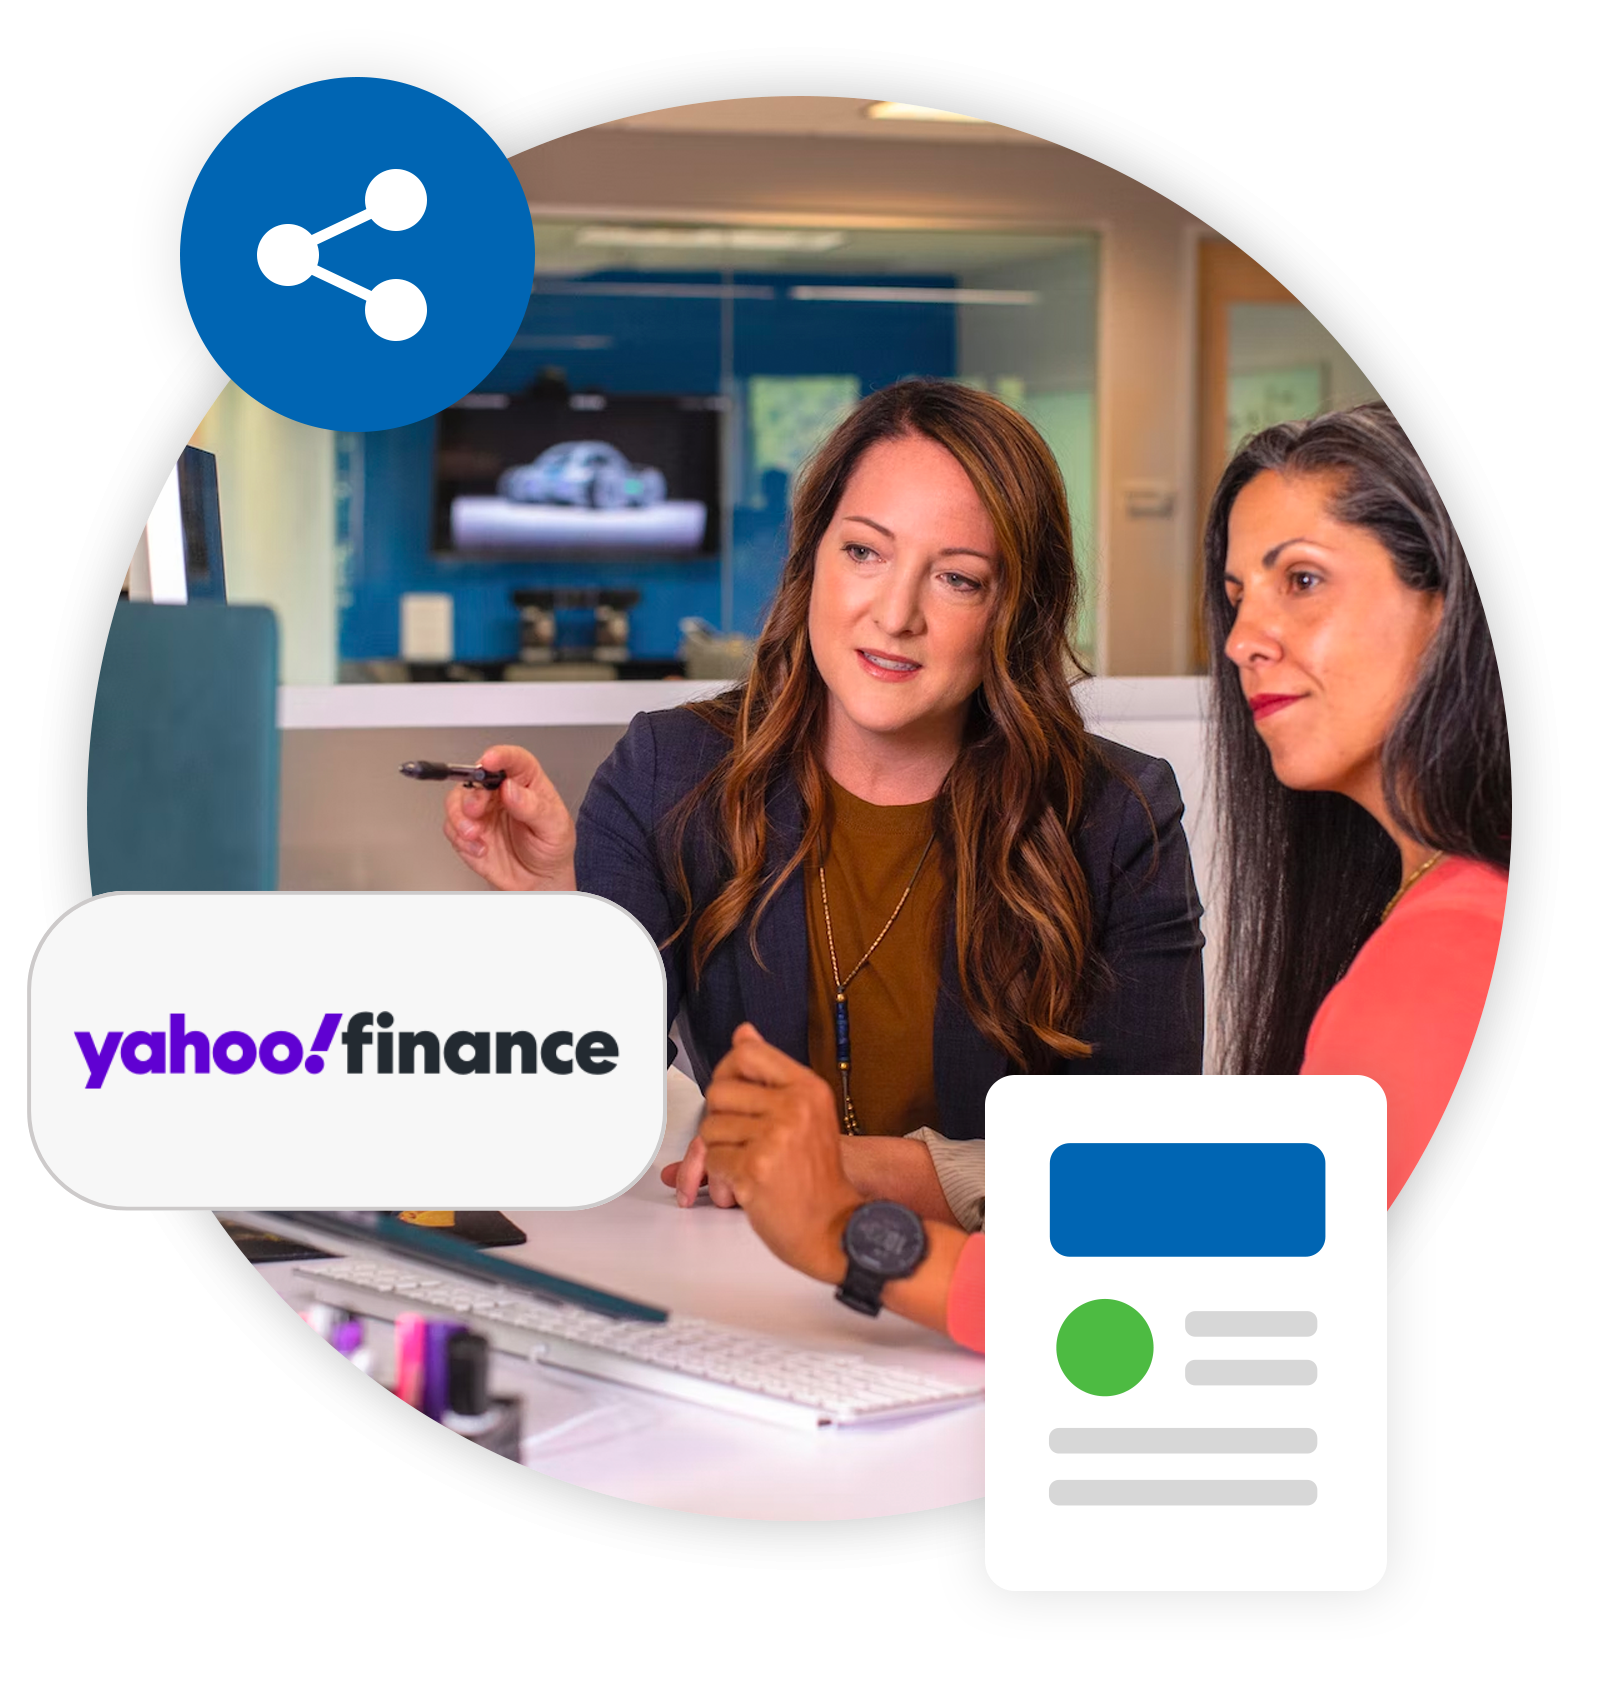 Share your law firm's news and press releases on Yahoo! Finance